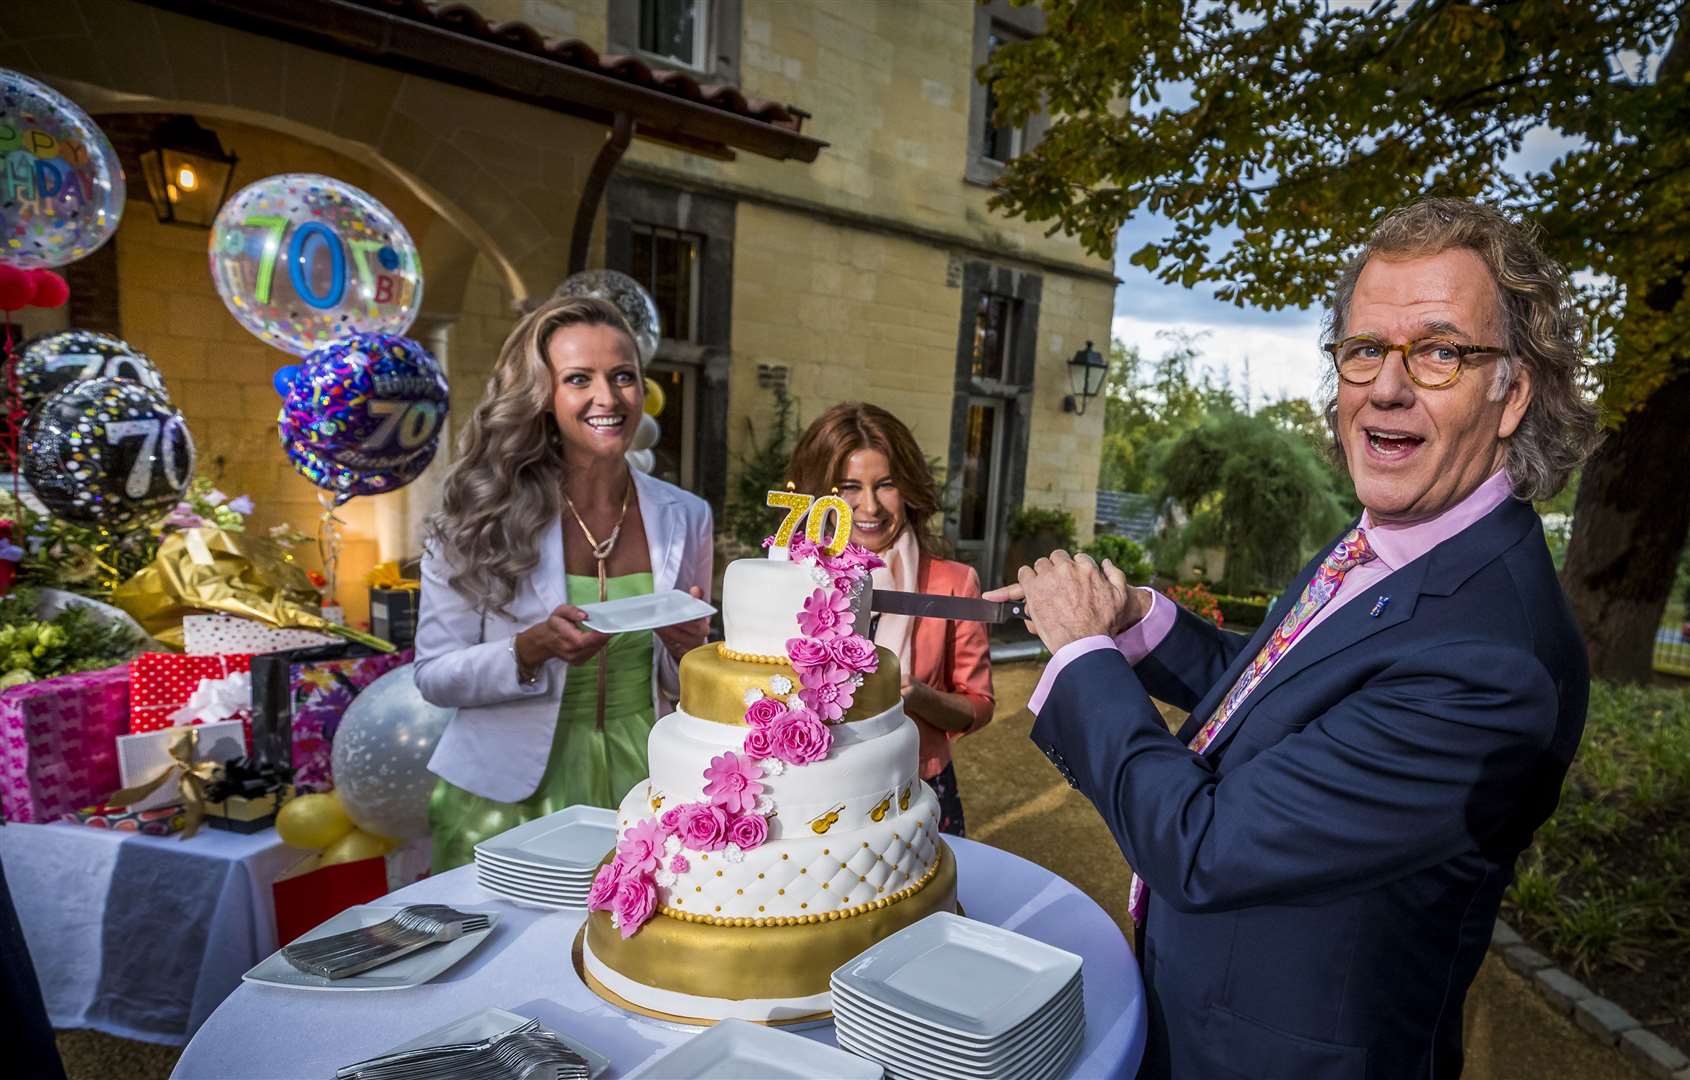 Andre Rieu will be celebrating his 70th birthday Picture: Marcel van Hoorn